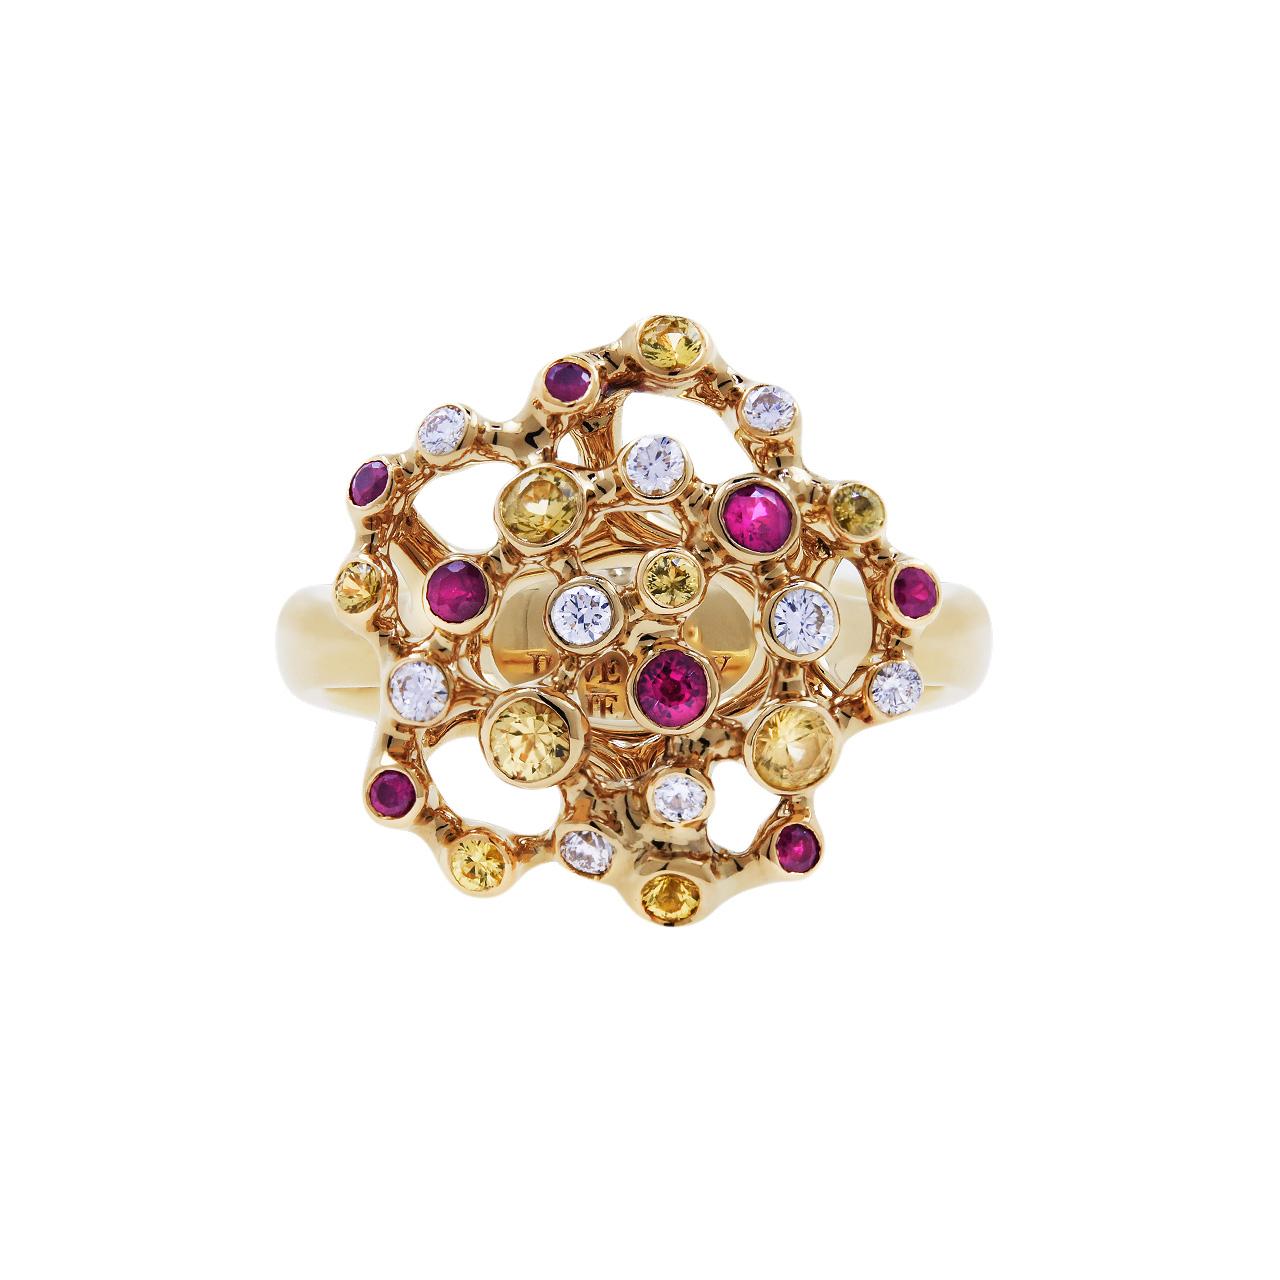 - 10 Round Diamonds - 0,13 ct, D-G/VVS
- 9 Round Yellow Sapphires - 0,30 ct
- 8 Round Rubies - 0,19 ct
- 18K Yellow Gold 
- Weight: 8,98 g
- Size: 17,4 mm
This elegant ring from the Byzantium collection is encrusted with 0,13 ct of diamonds, 0,30 ct